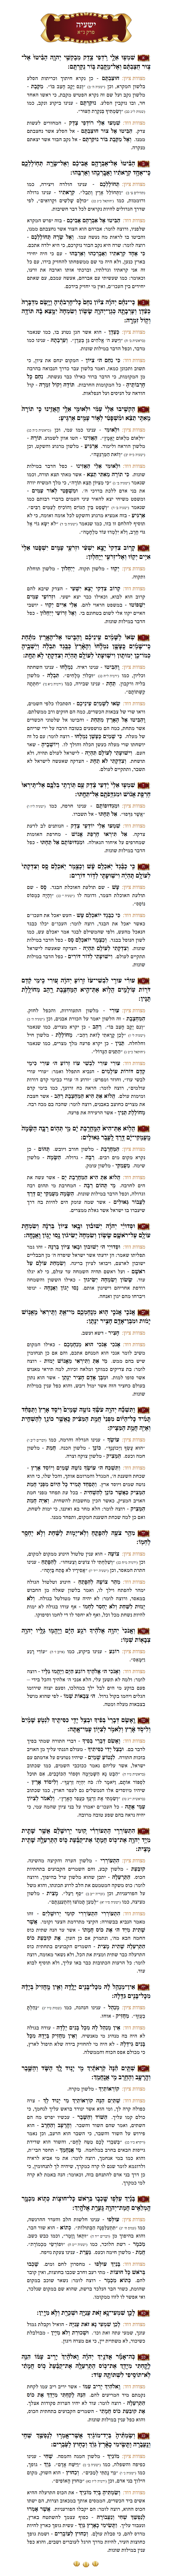 Sefer Yeshayohu Chapter 51 with commentary